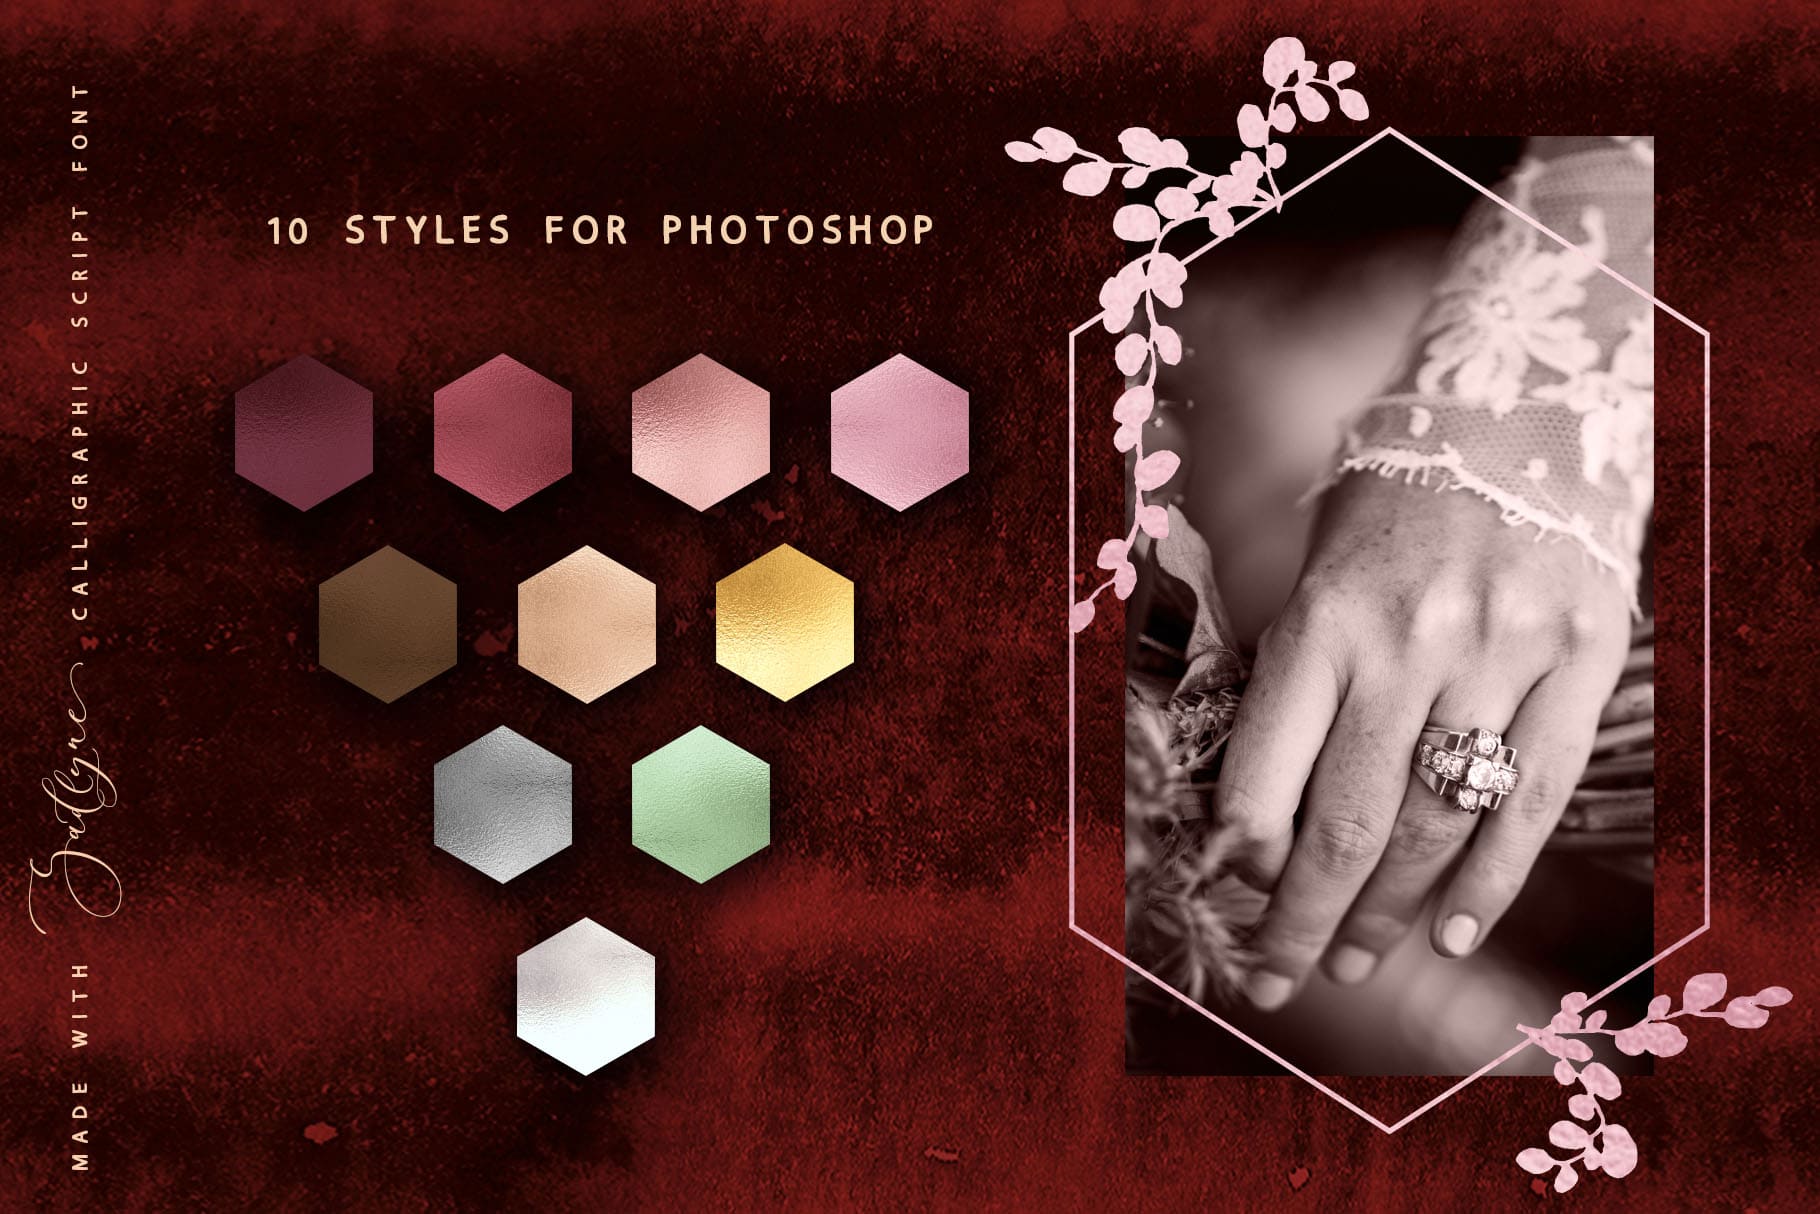 Styles for photoshop.